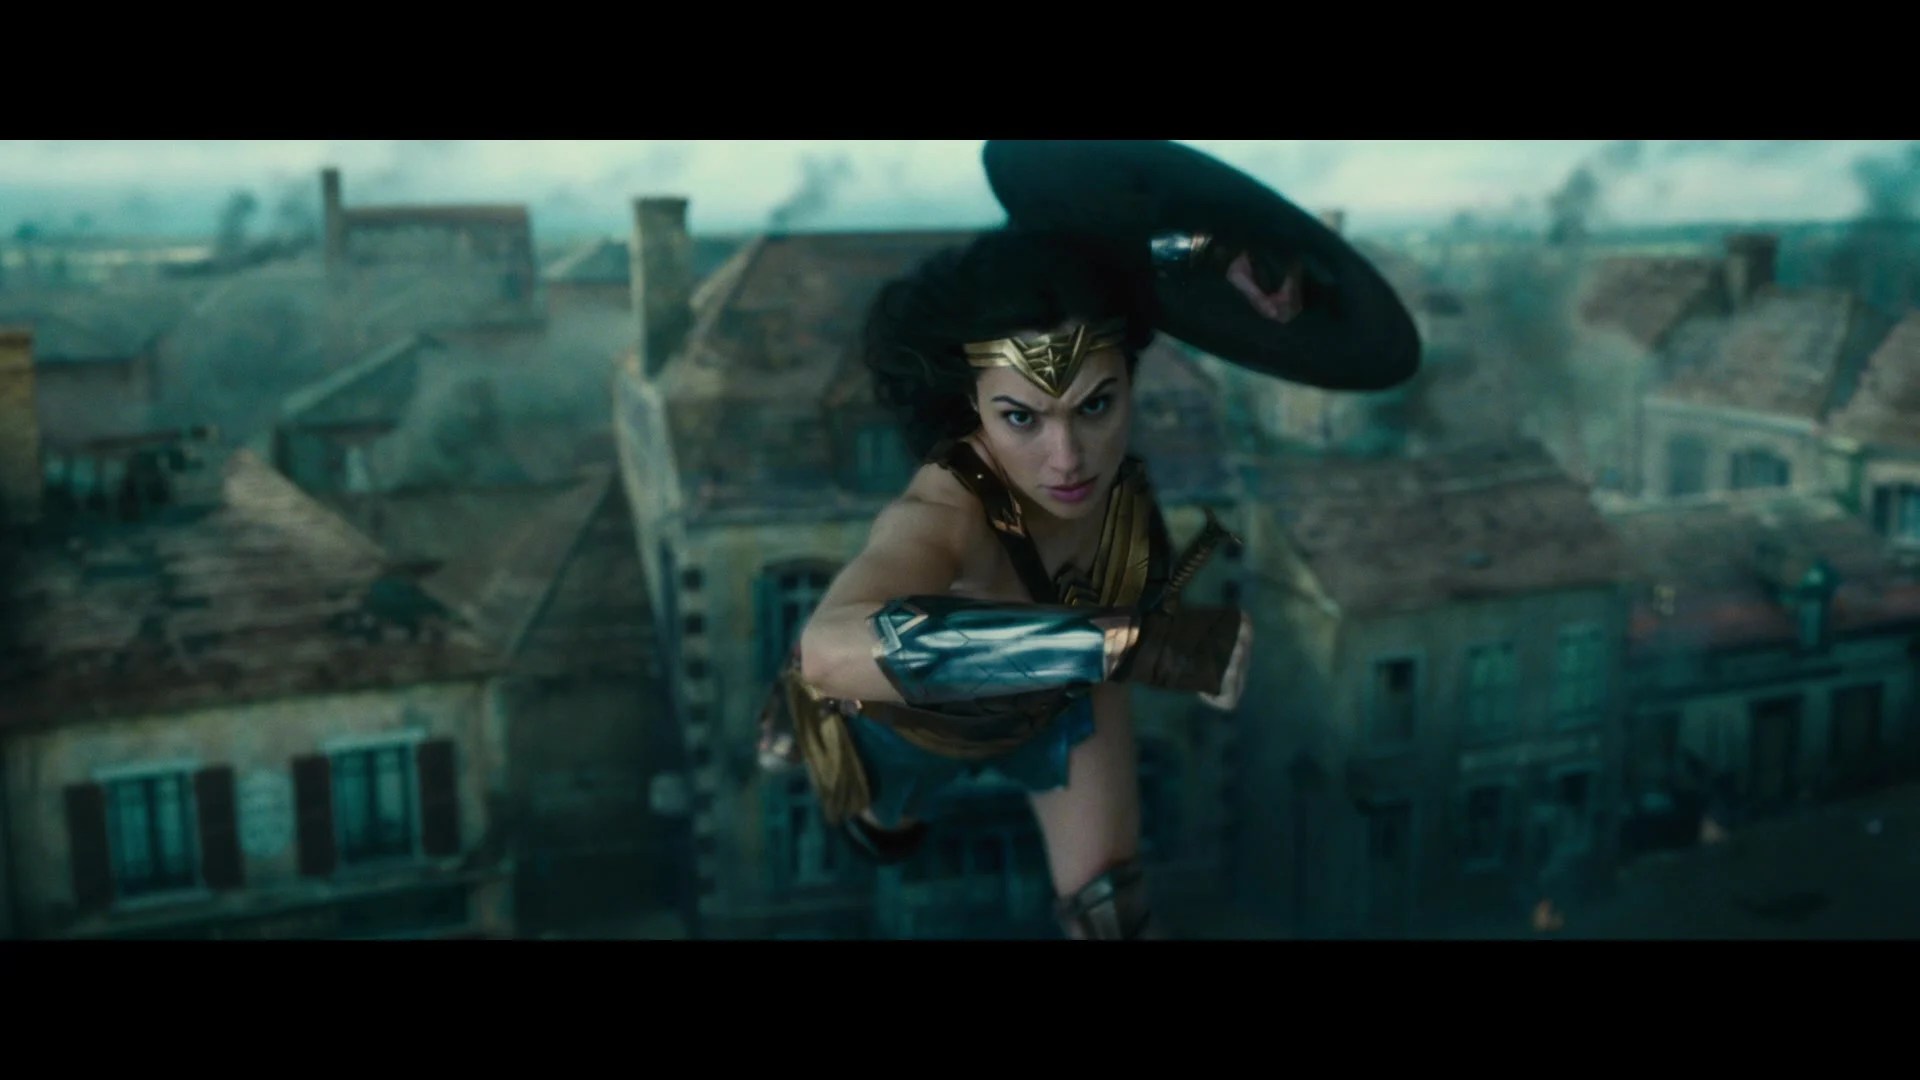 Diana (Gal Gadot) leaps to take out an enemy soldier during the Liberation of Veld in Wonder Woman (2017), Warner Bros, Pictures via Blu-ray